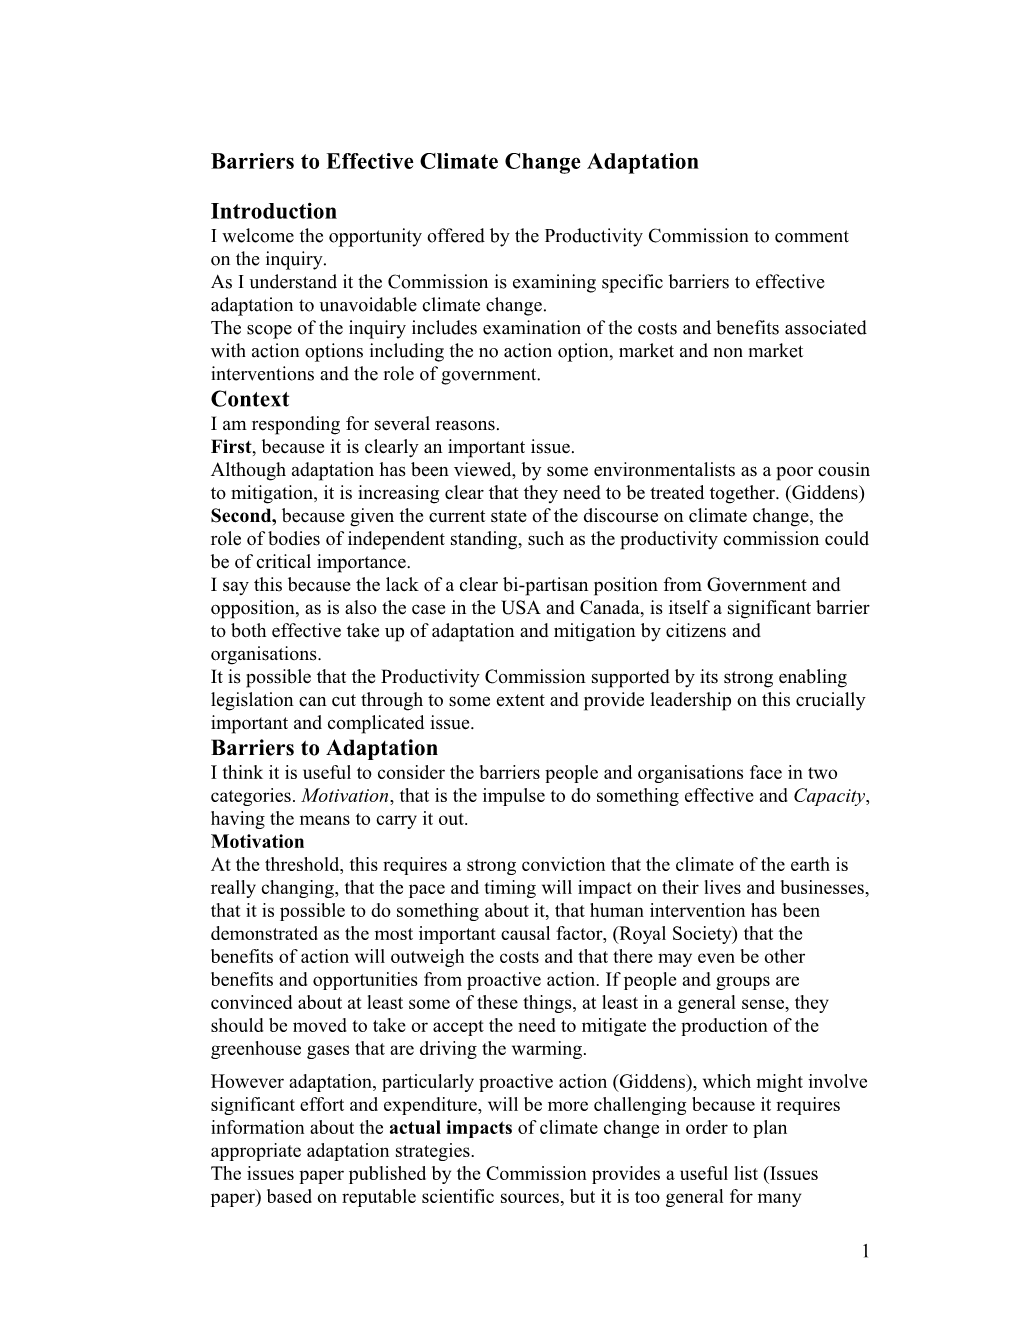 Submission 27 - Barry Pullen - Barriers to Effective Climate Change Adaptation - Public Inquiry